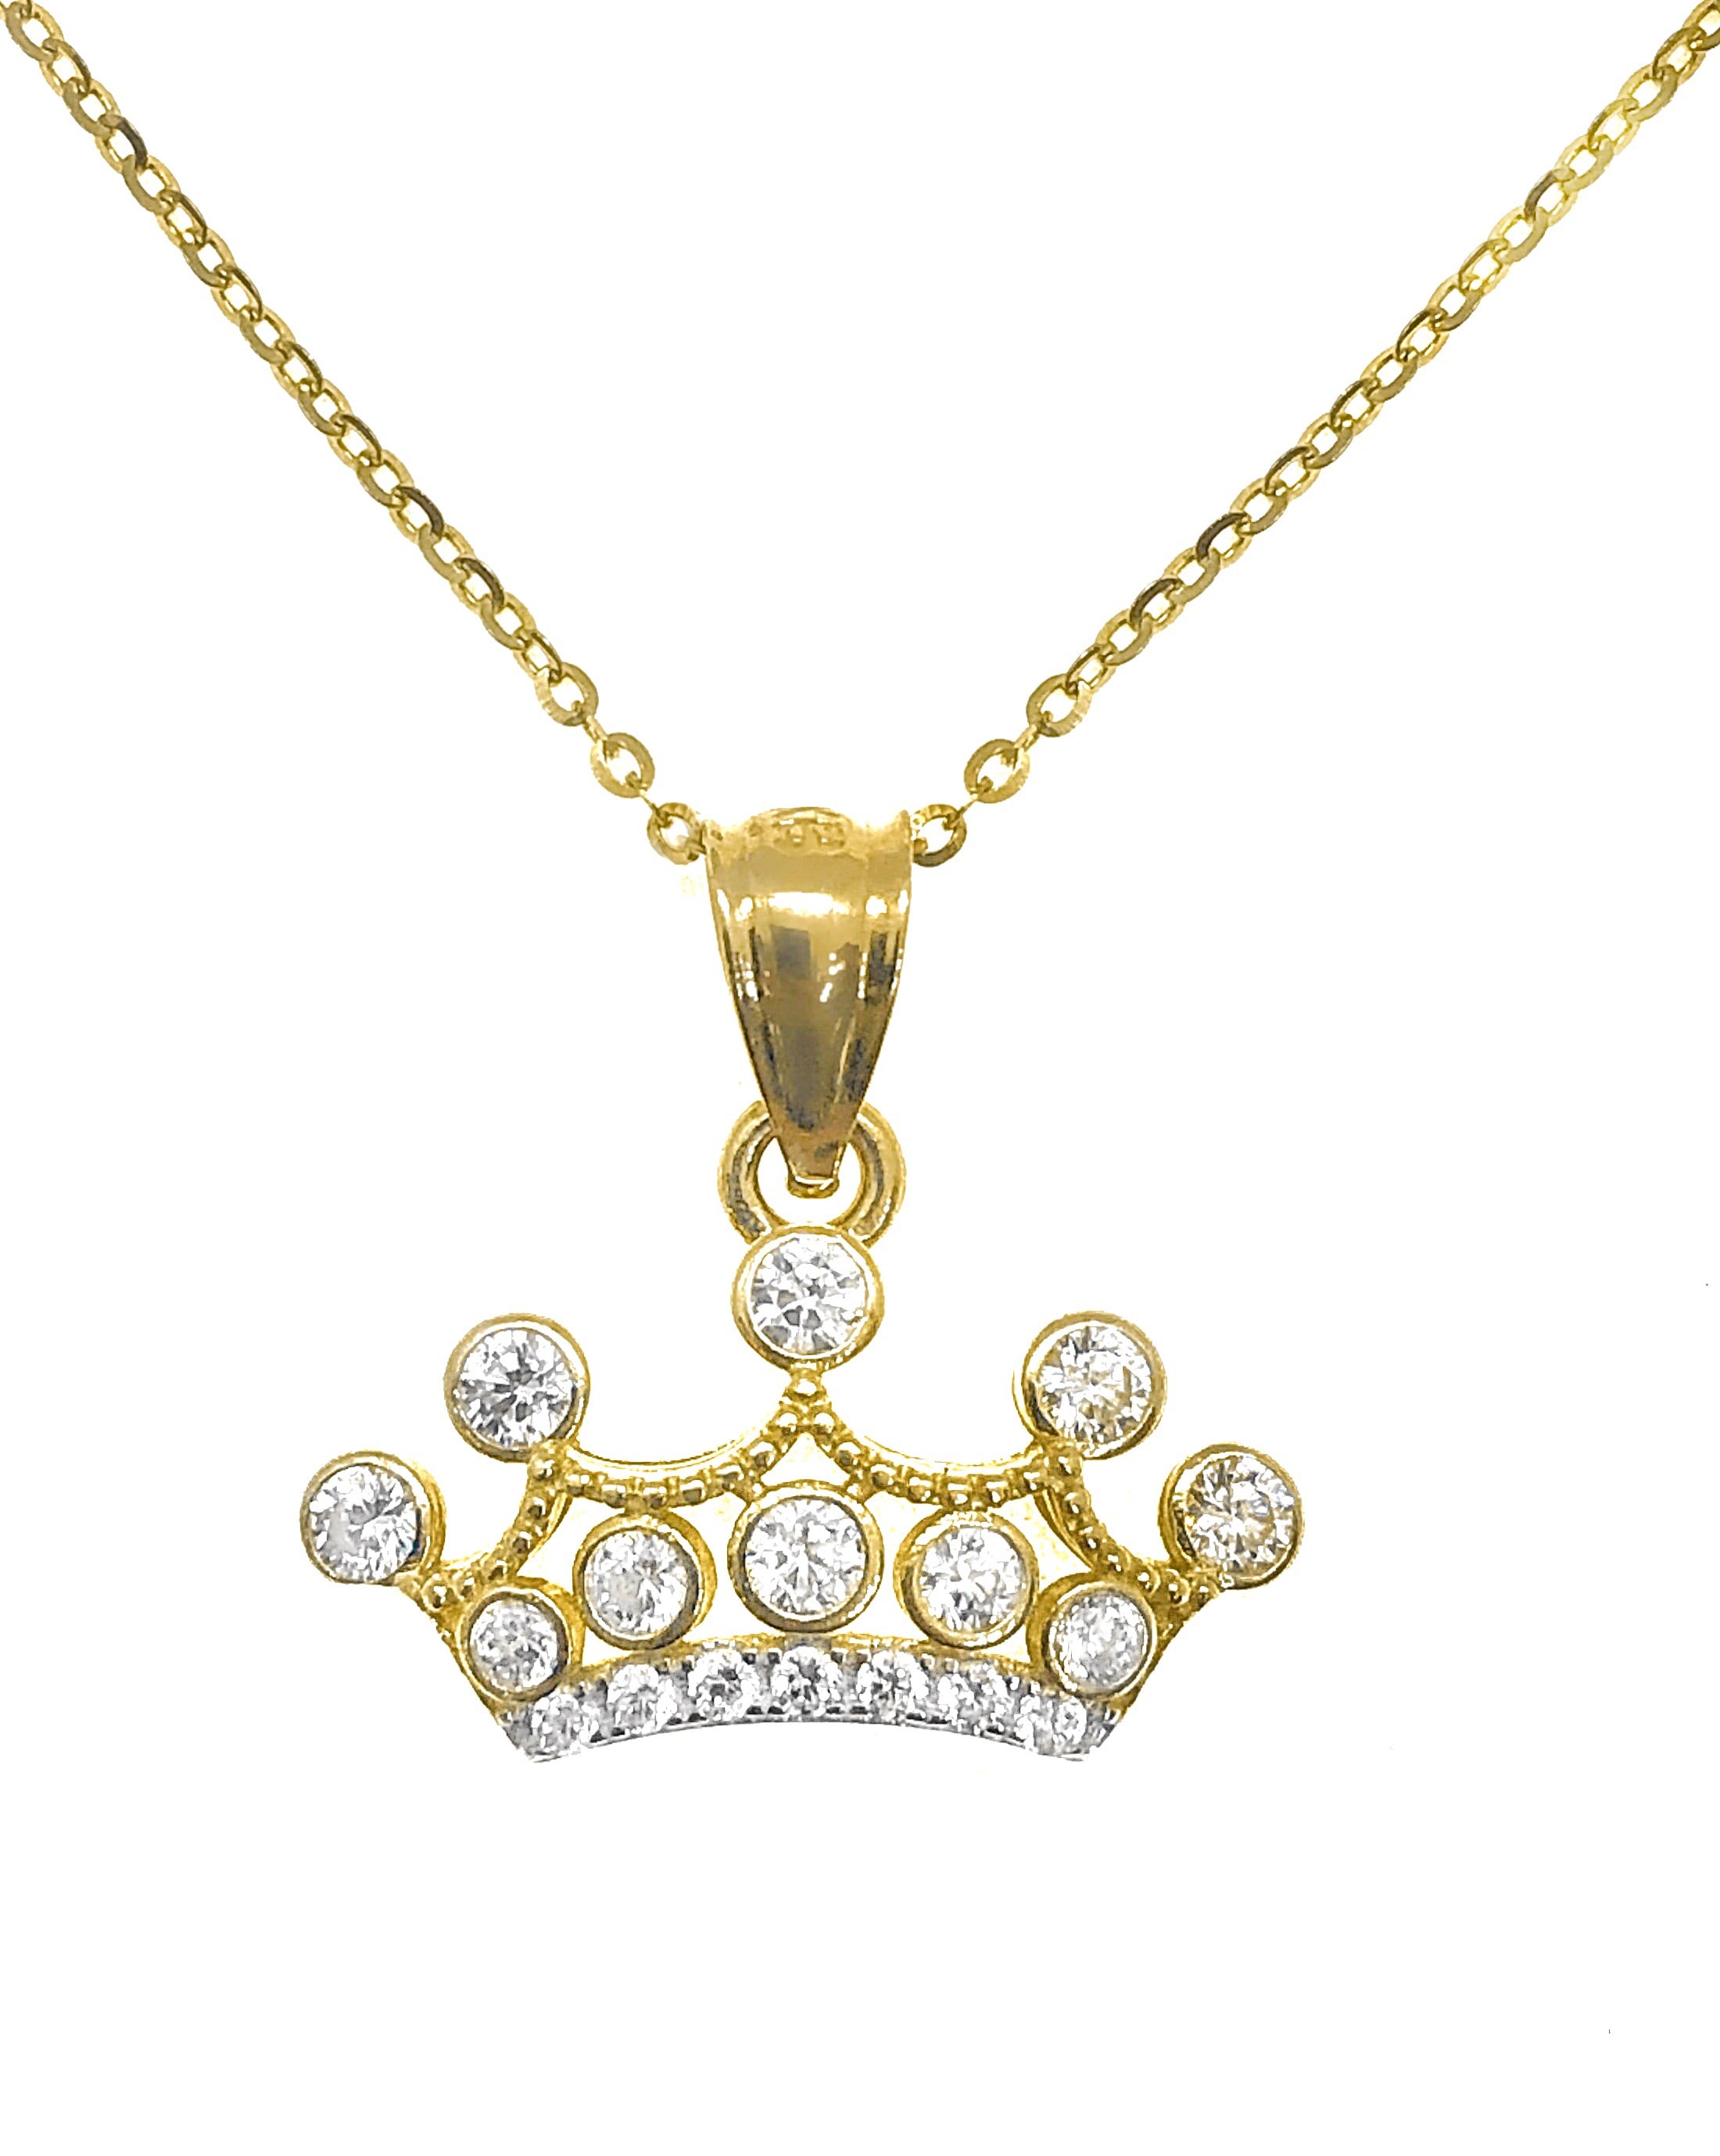 14K YELLOW GOLD CROWN CZ NECKLACE